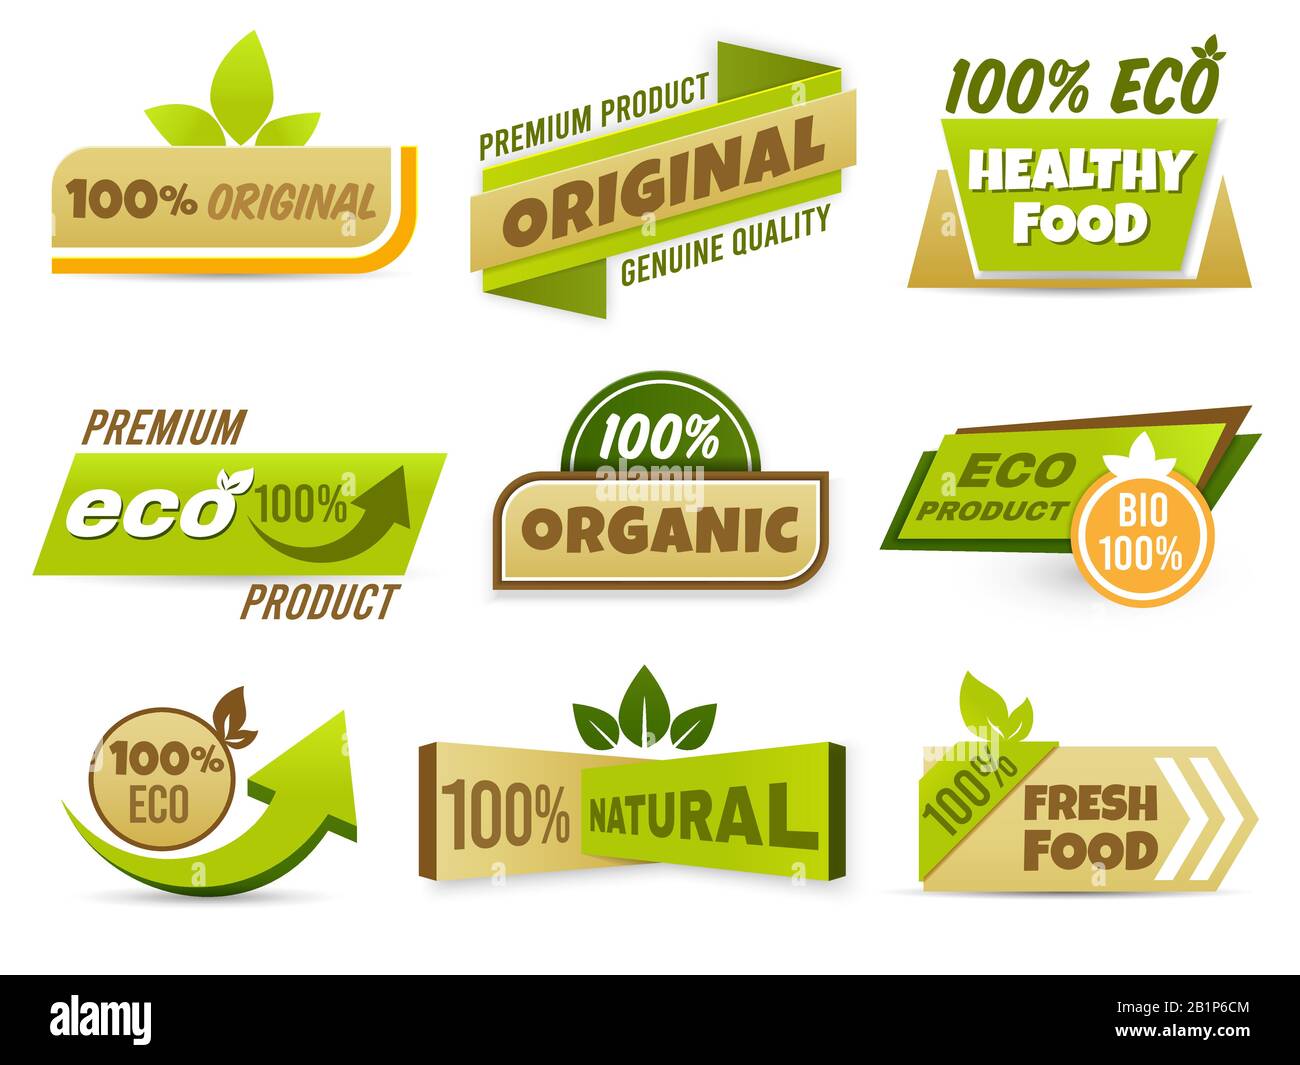 Eco label banner. Healthy food labels, eco bio product and natural organic emblem badges vector set. 100 percent original production tags collection Stock Vector